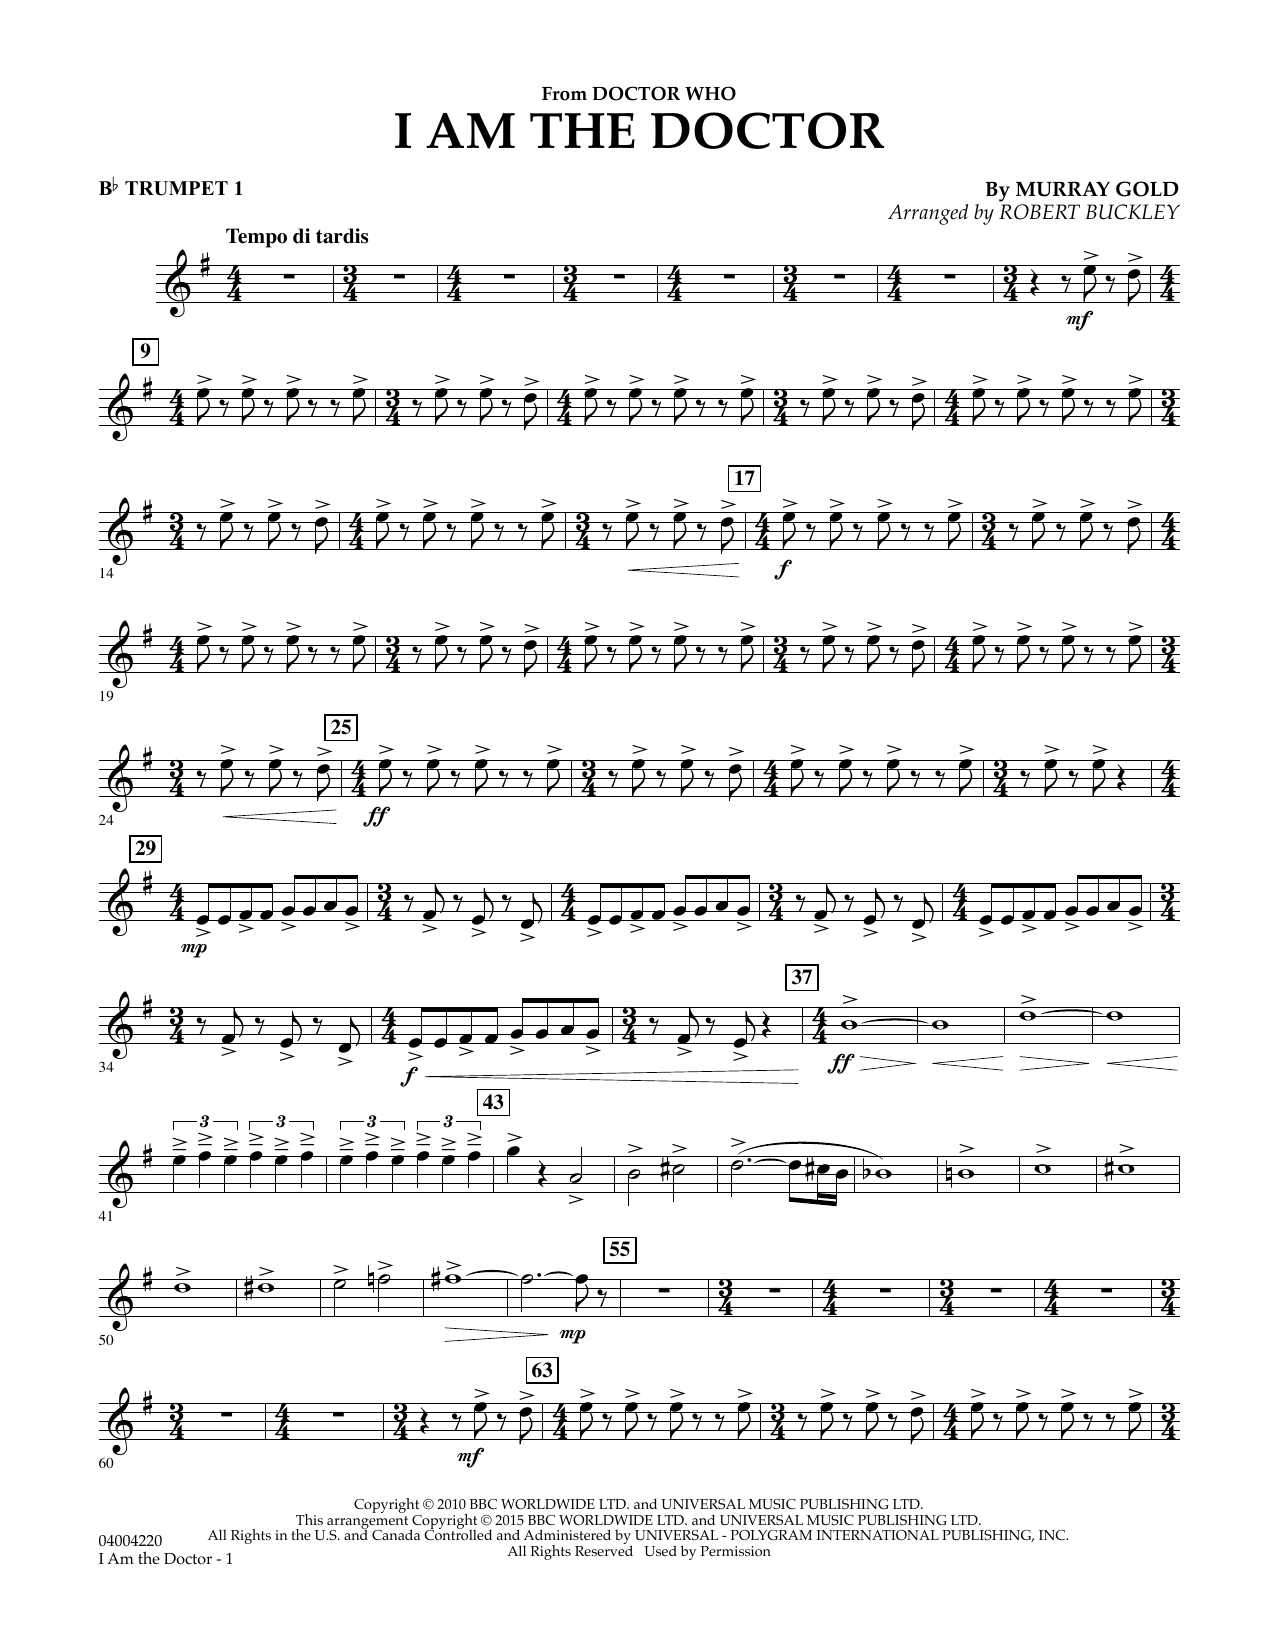 Robert Buckley I Am the Doctor (from Doctor Who) - Bb Trumpet 1 sheet music notes and chords. Download Printable PDF.